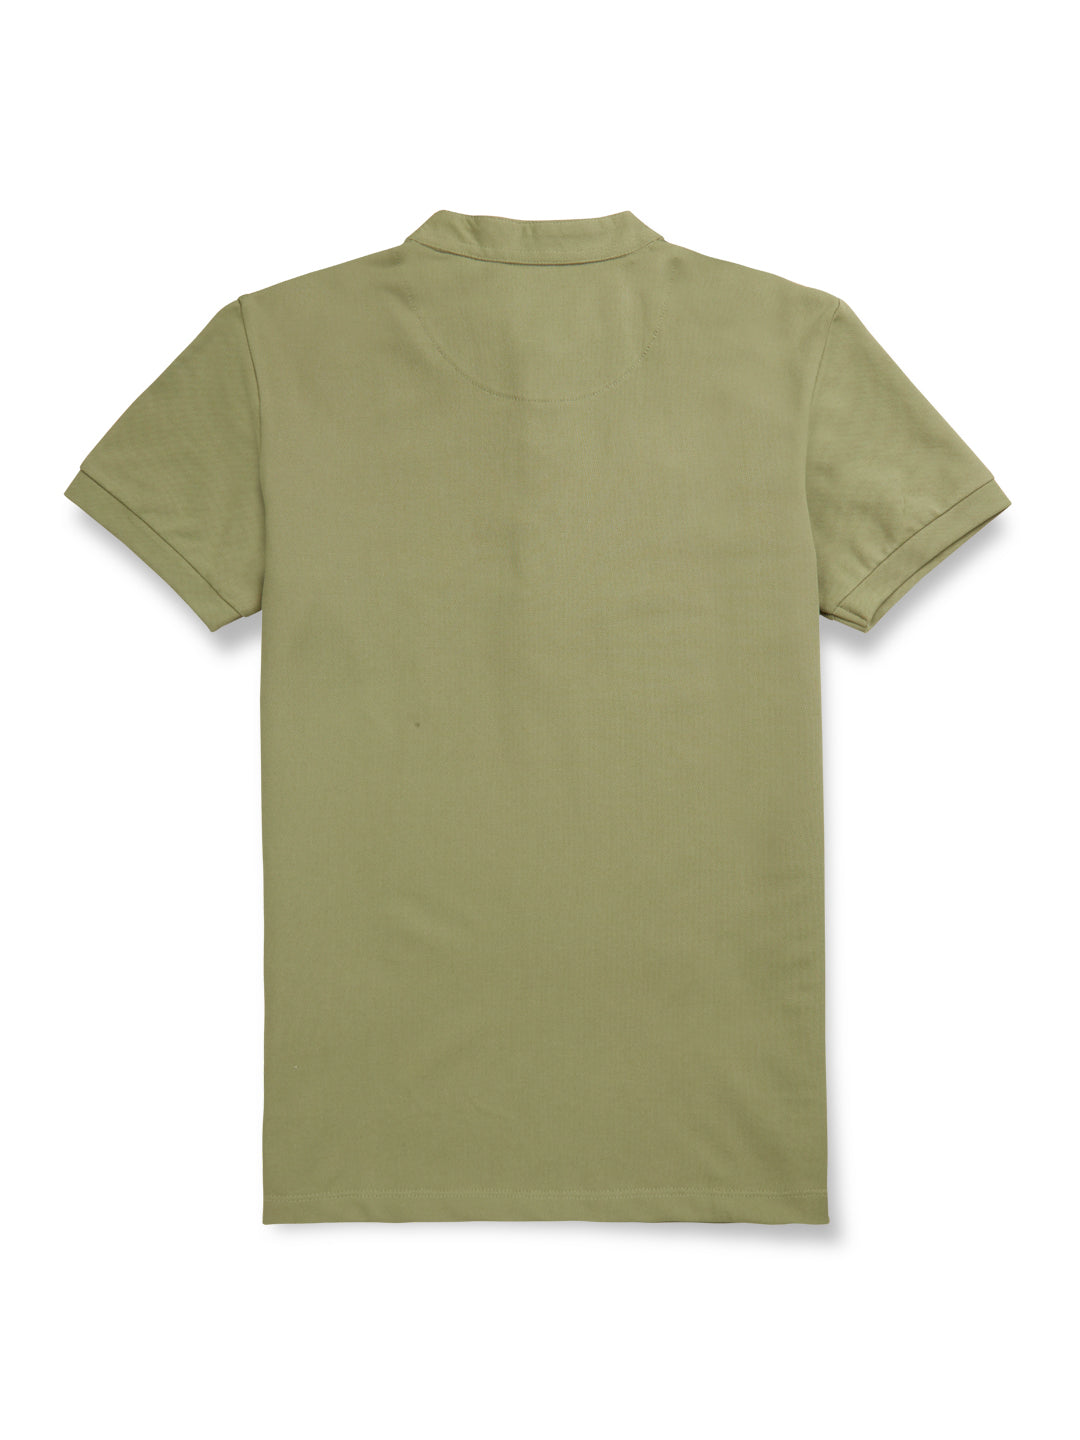 Boys Olive Solid Cotton T-Shirt